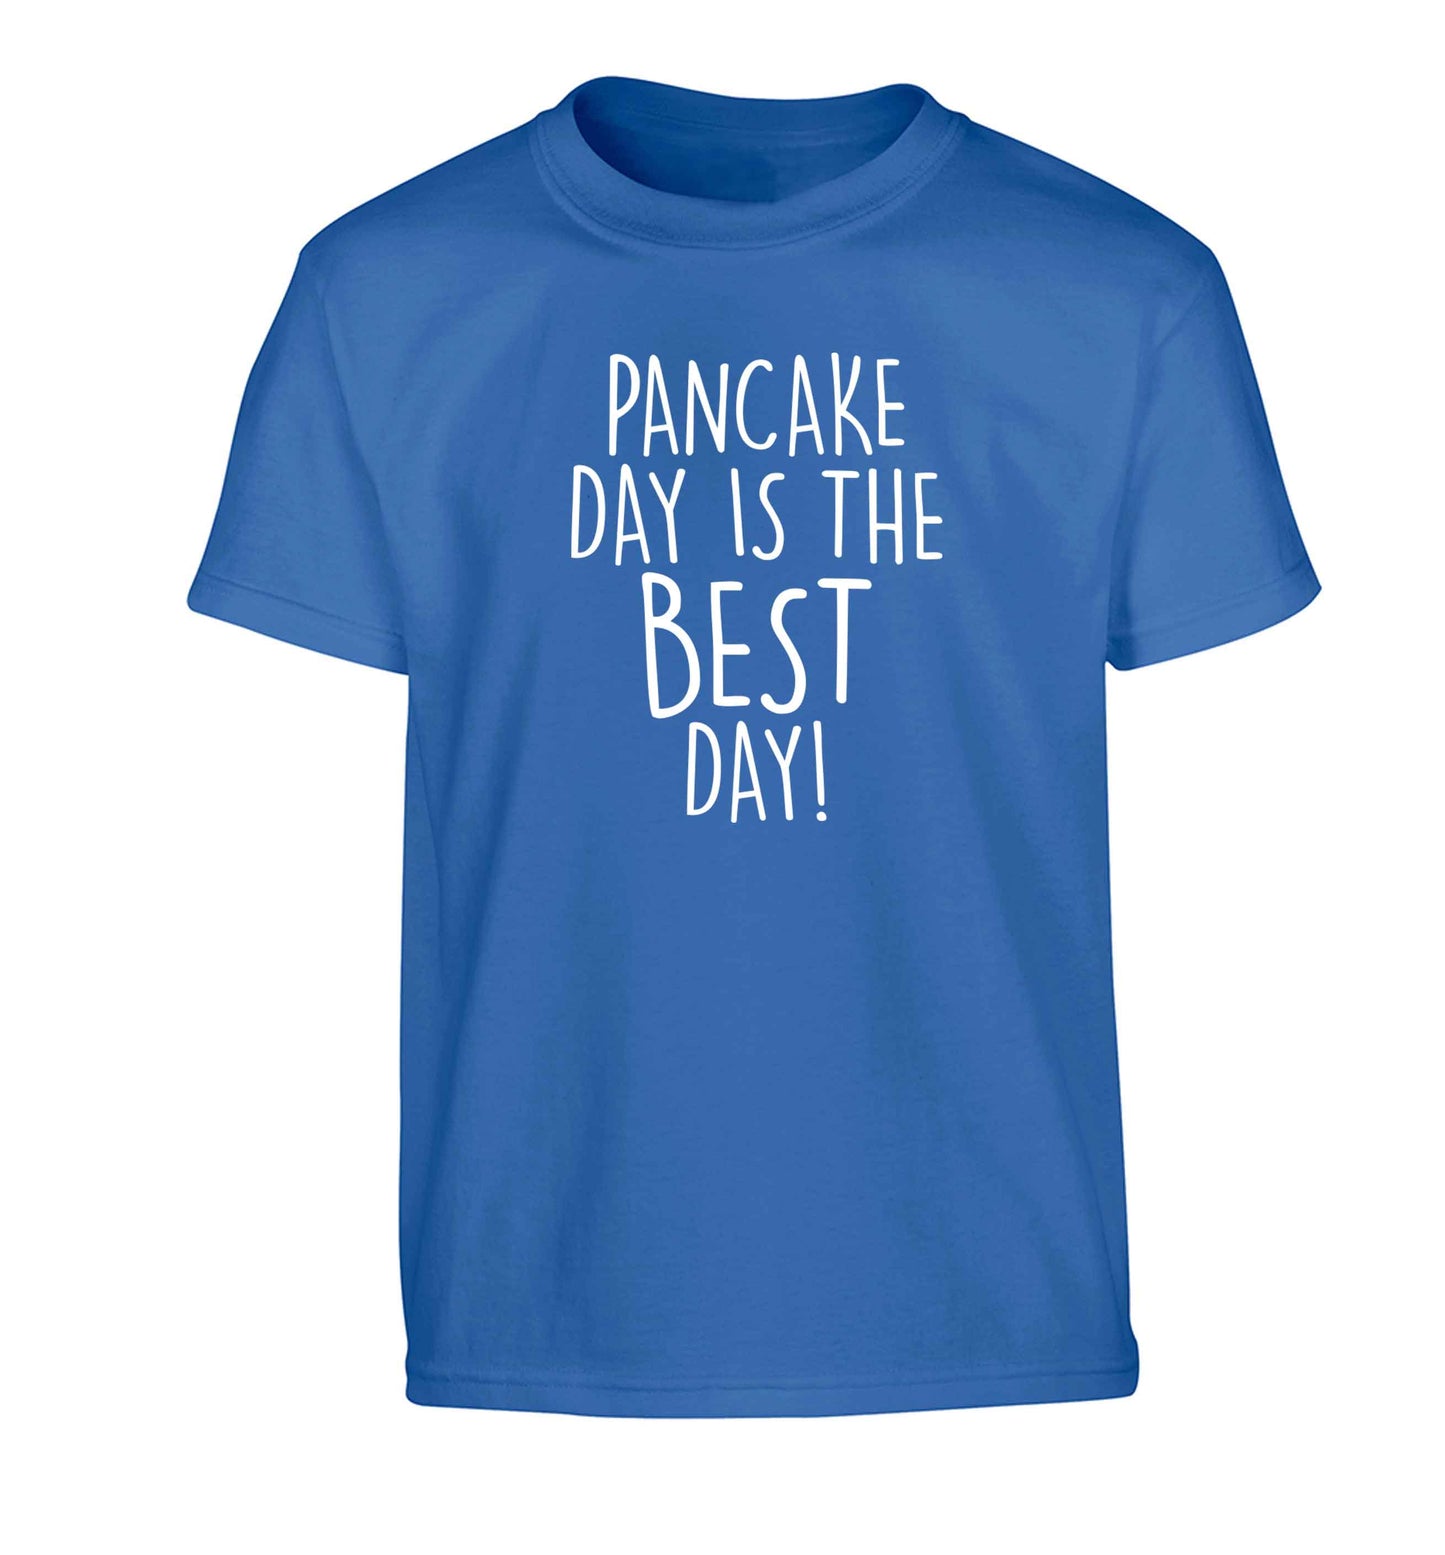 Pancake day is the best day Children's blue Tshirt 12-13 Years